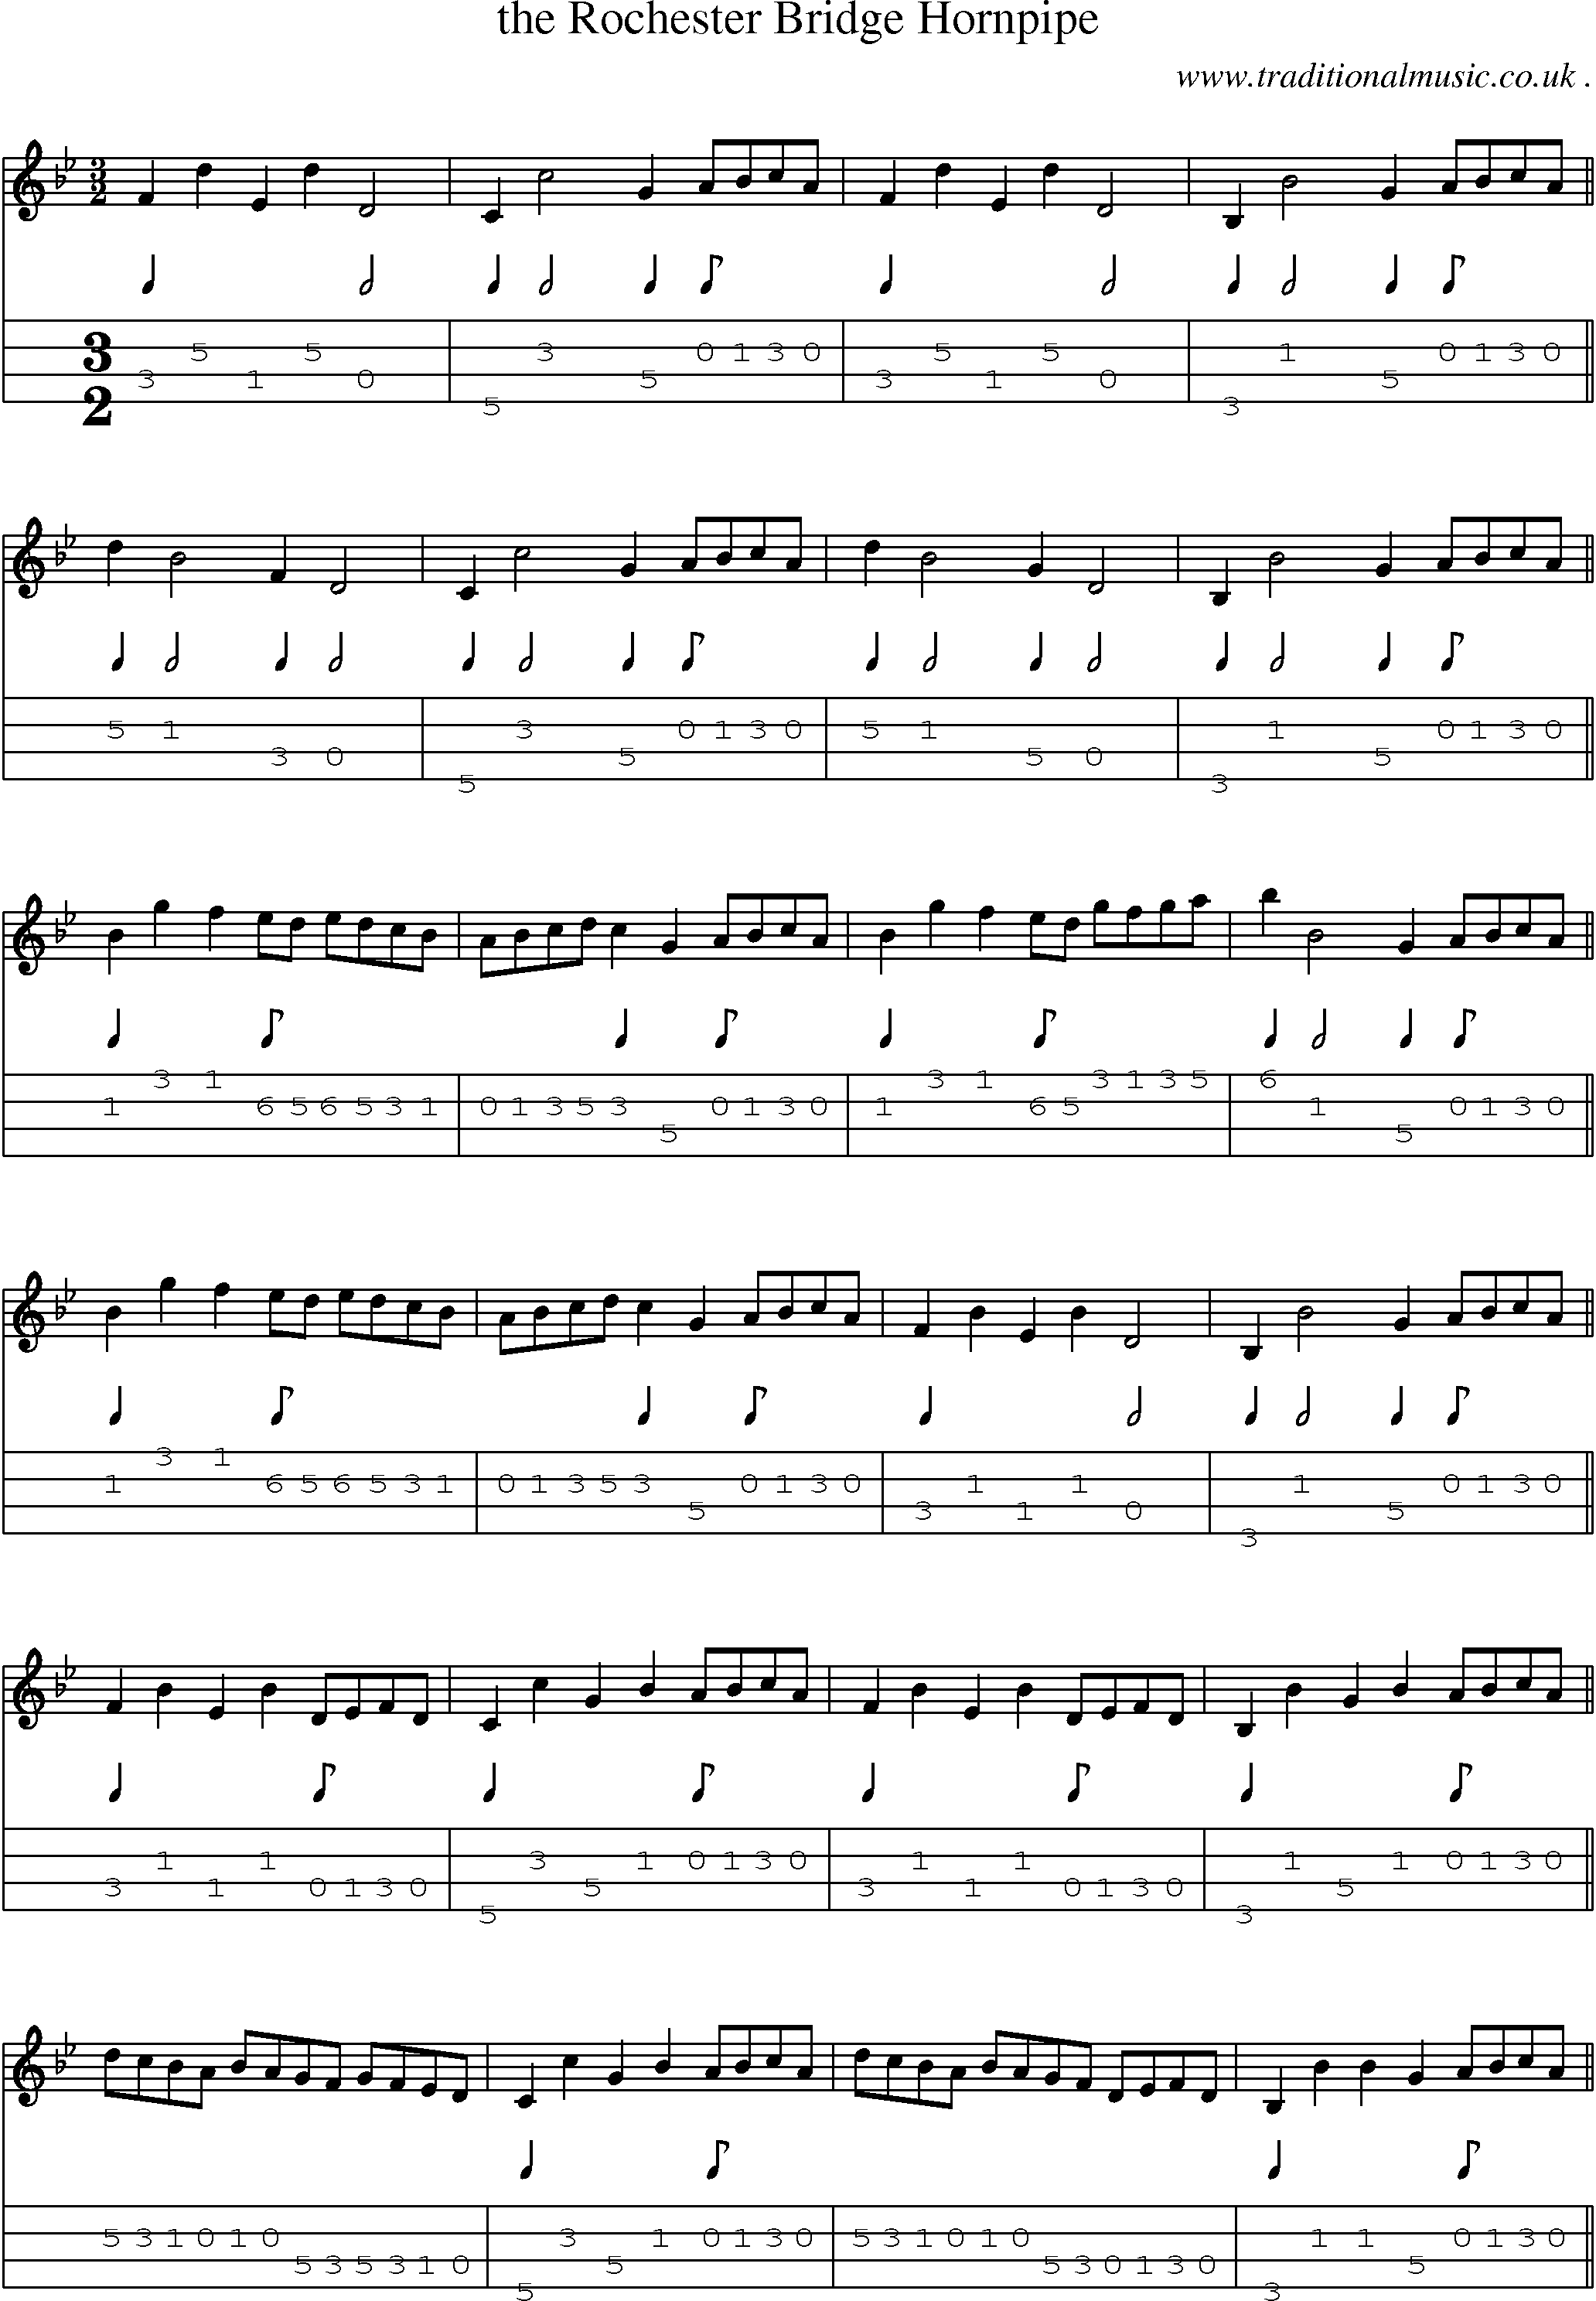 Sheet-Music and Mandolin Tabs for The Rochester Bridge Hornpipe